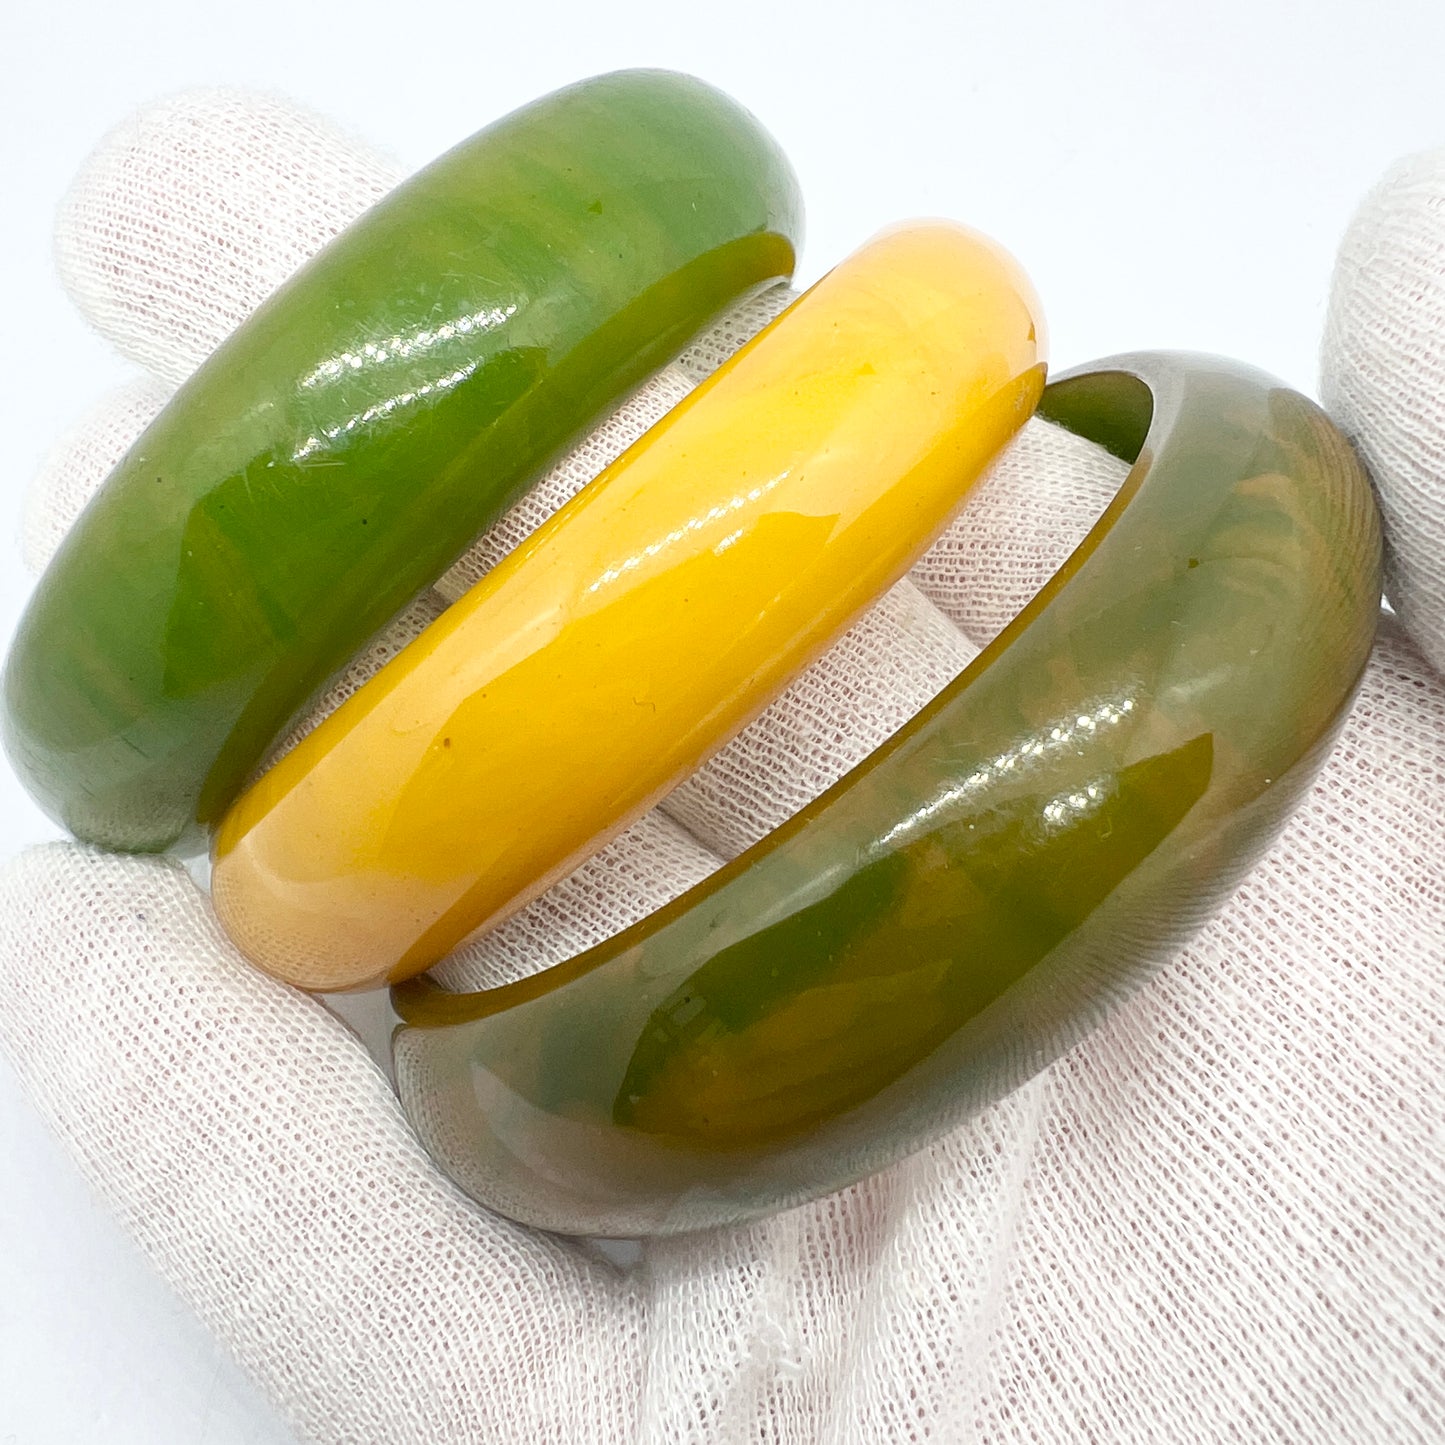 Vintage c 1940-50s Bakelite Early Plastic Bangles with Exhibition Provenance. Jade Green and Butterscotch Colour.